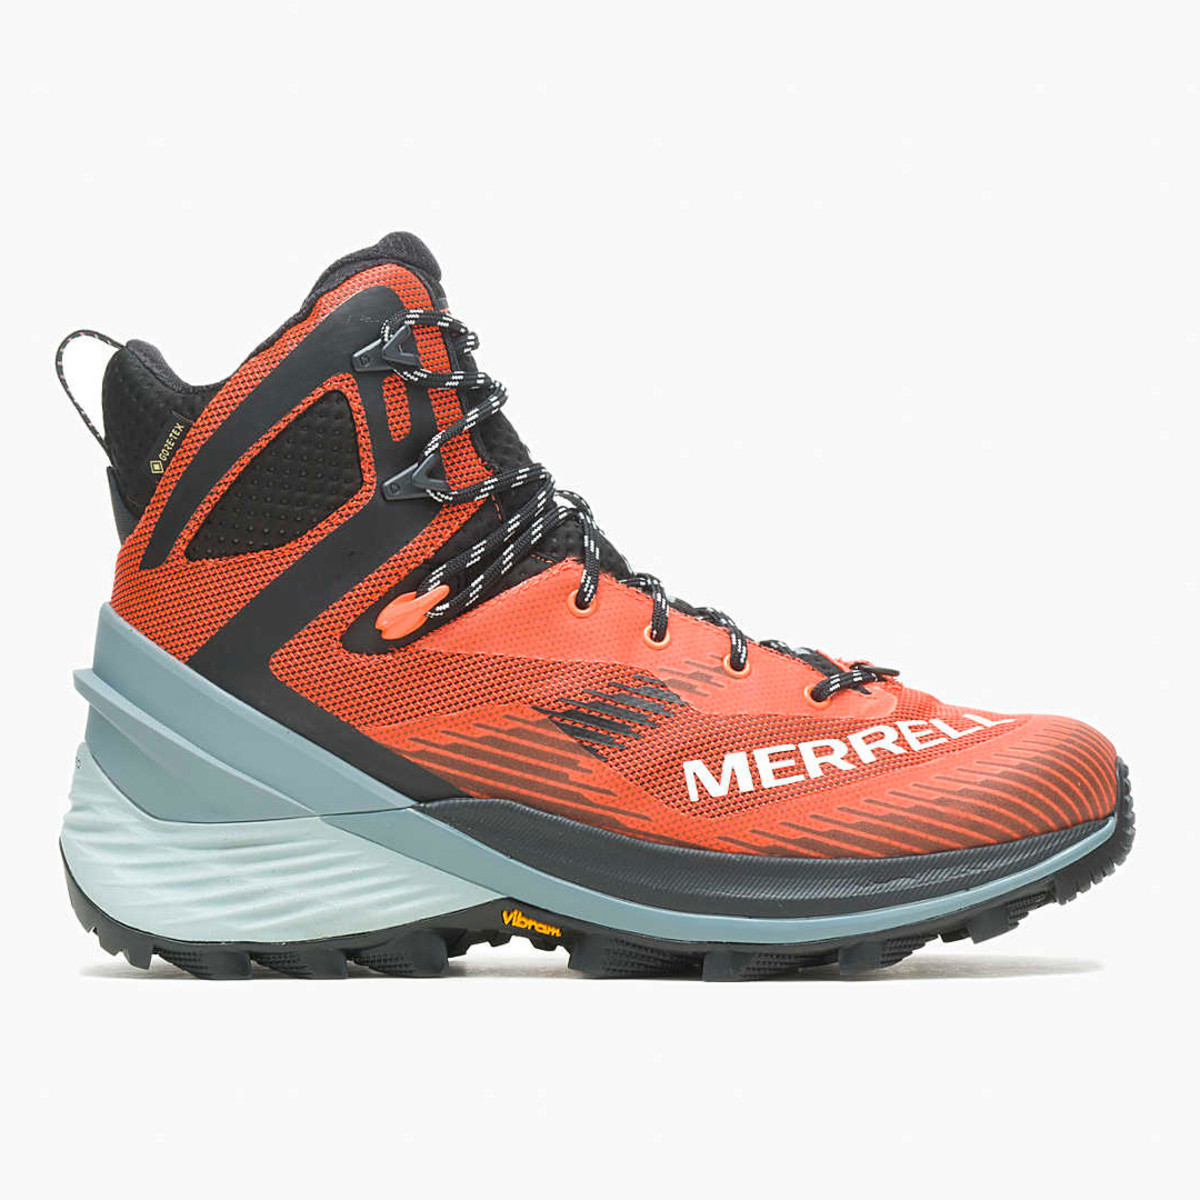 The Merrell Rogue Hiker Mid Gore-Tex is on sale right now at Merrell